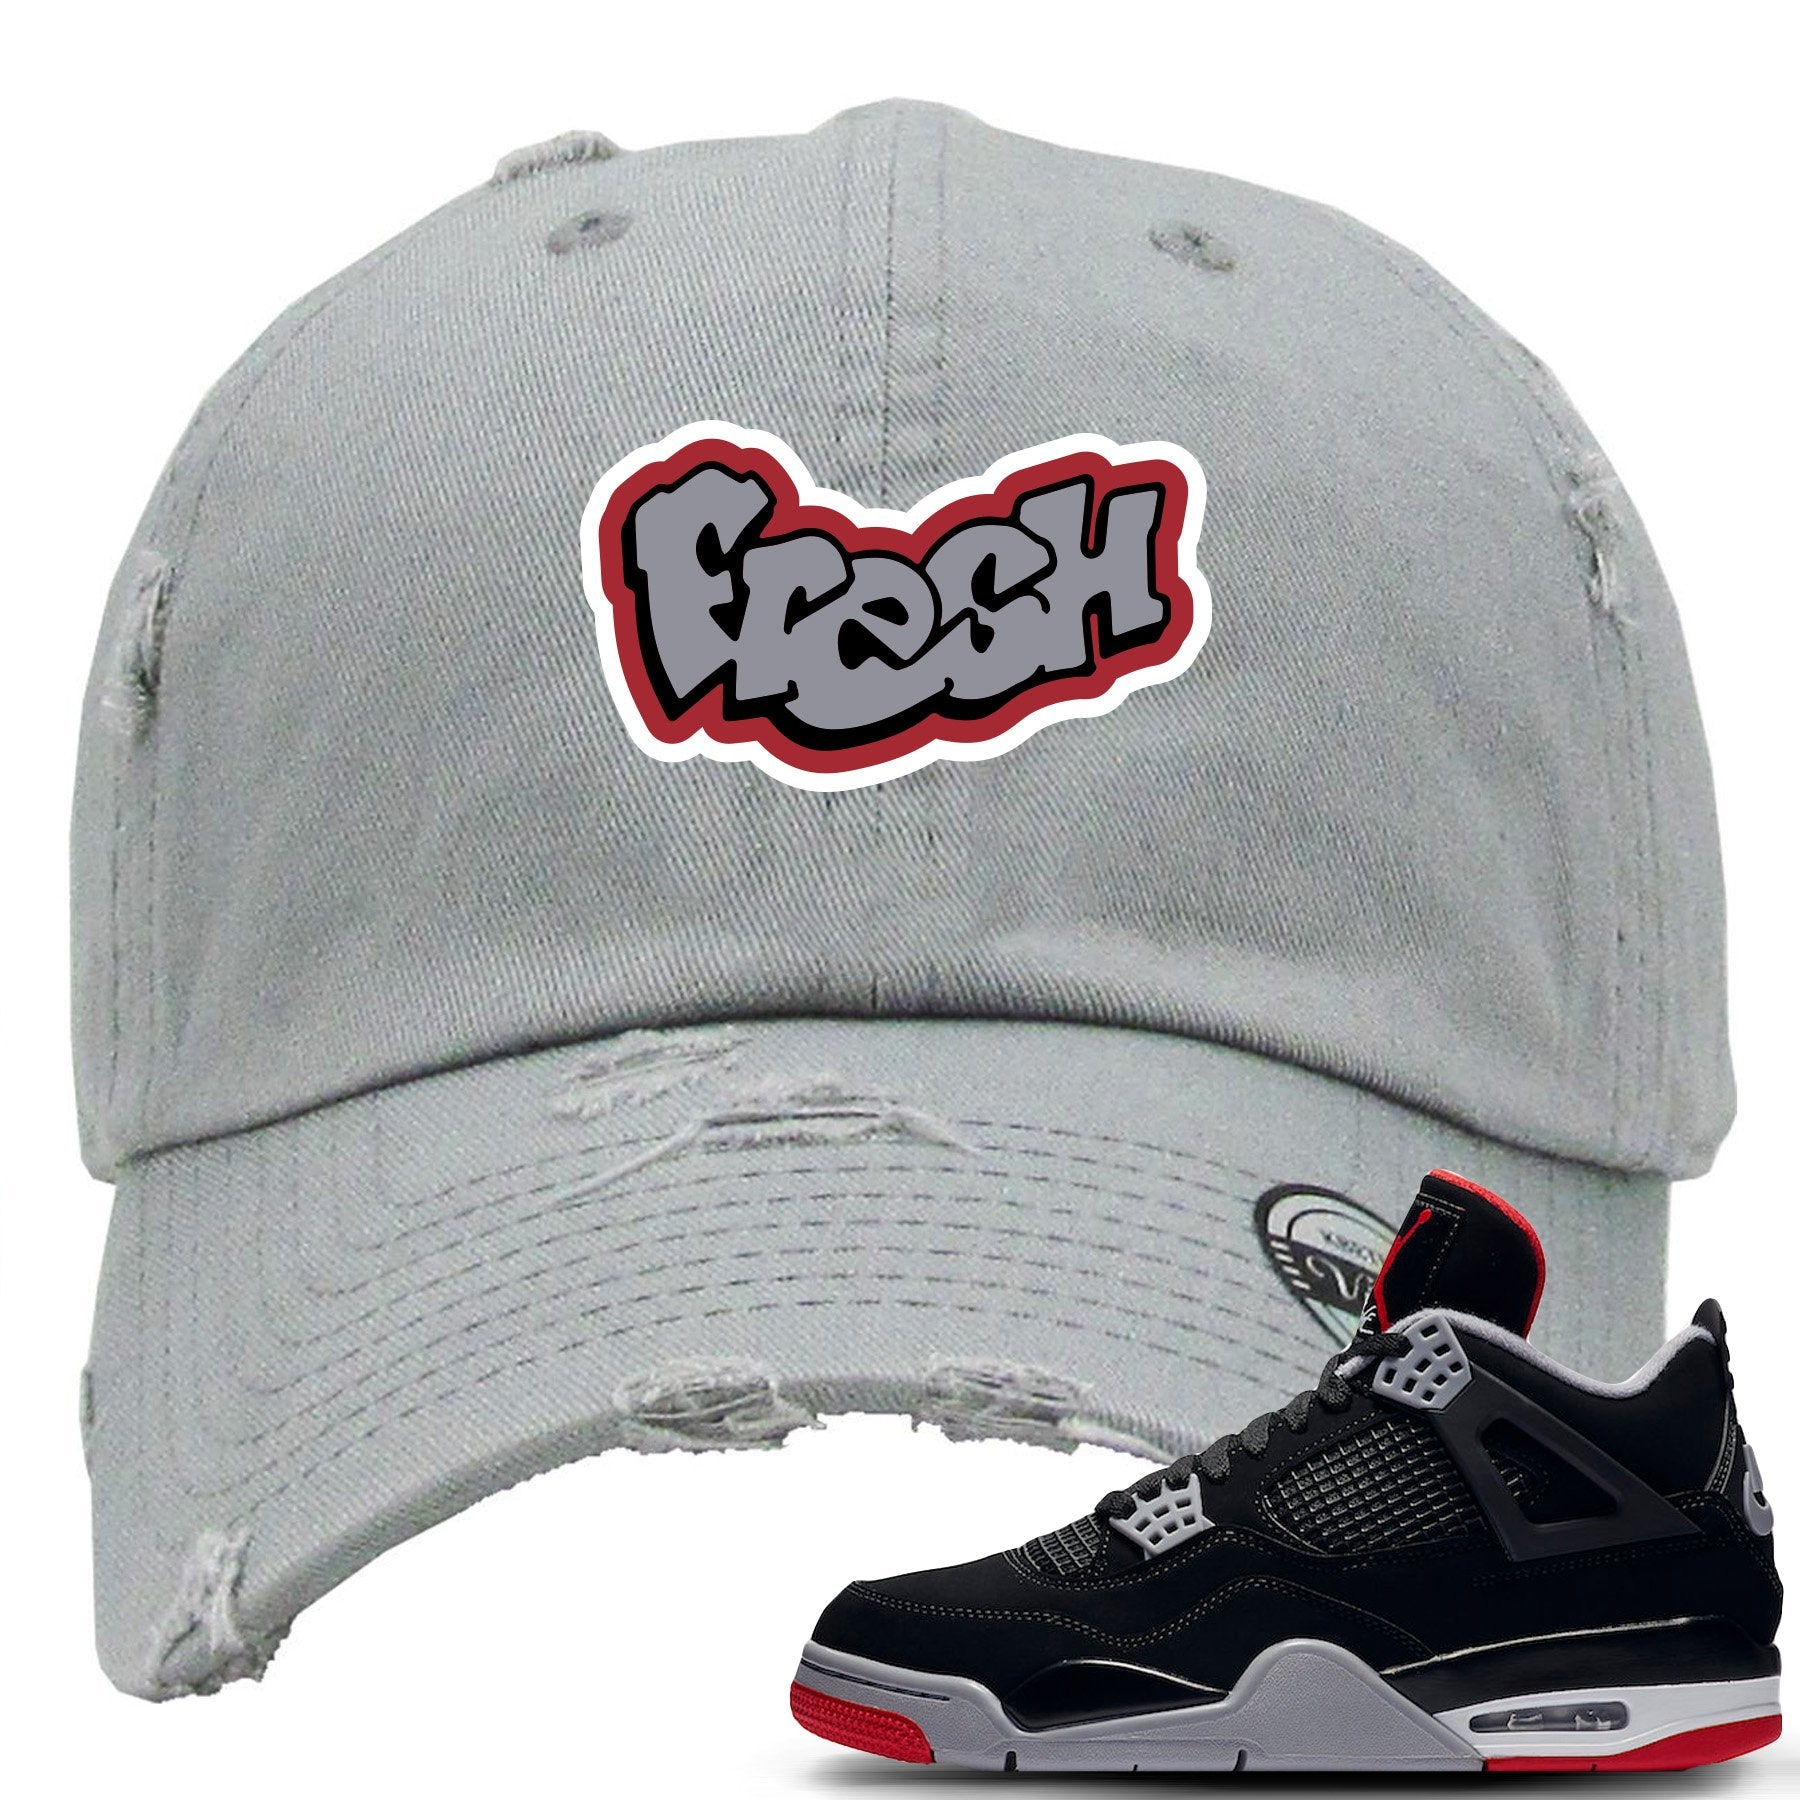 This grey dad hat will match great with your Air Jordan 4 Bred shoes